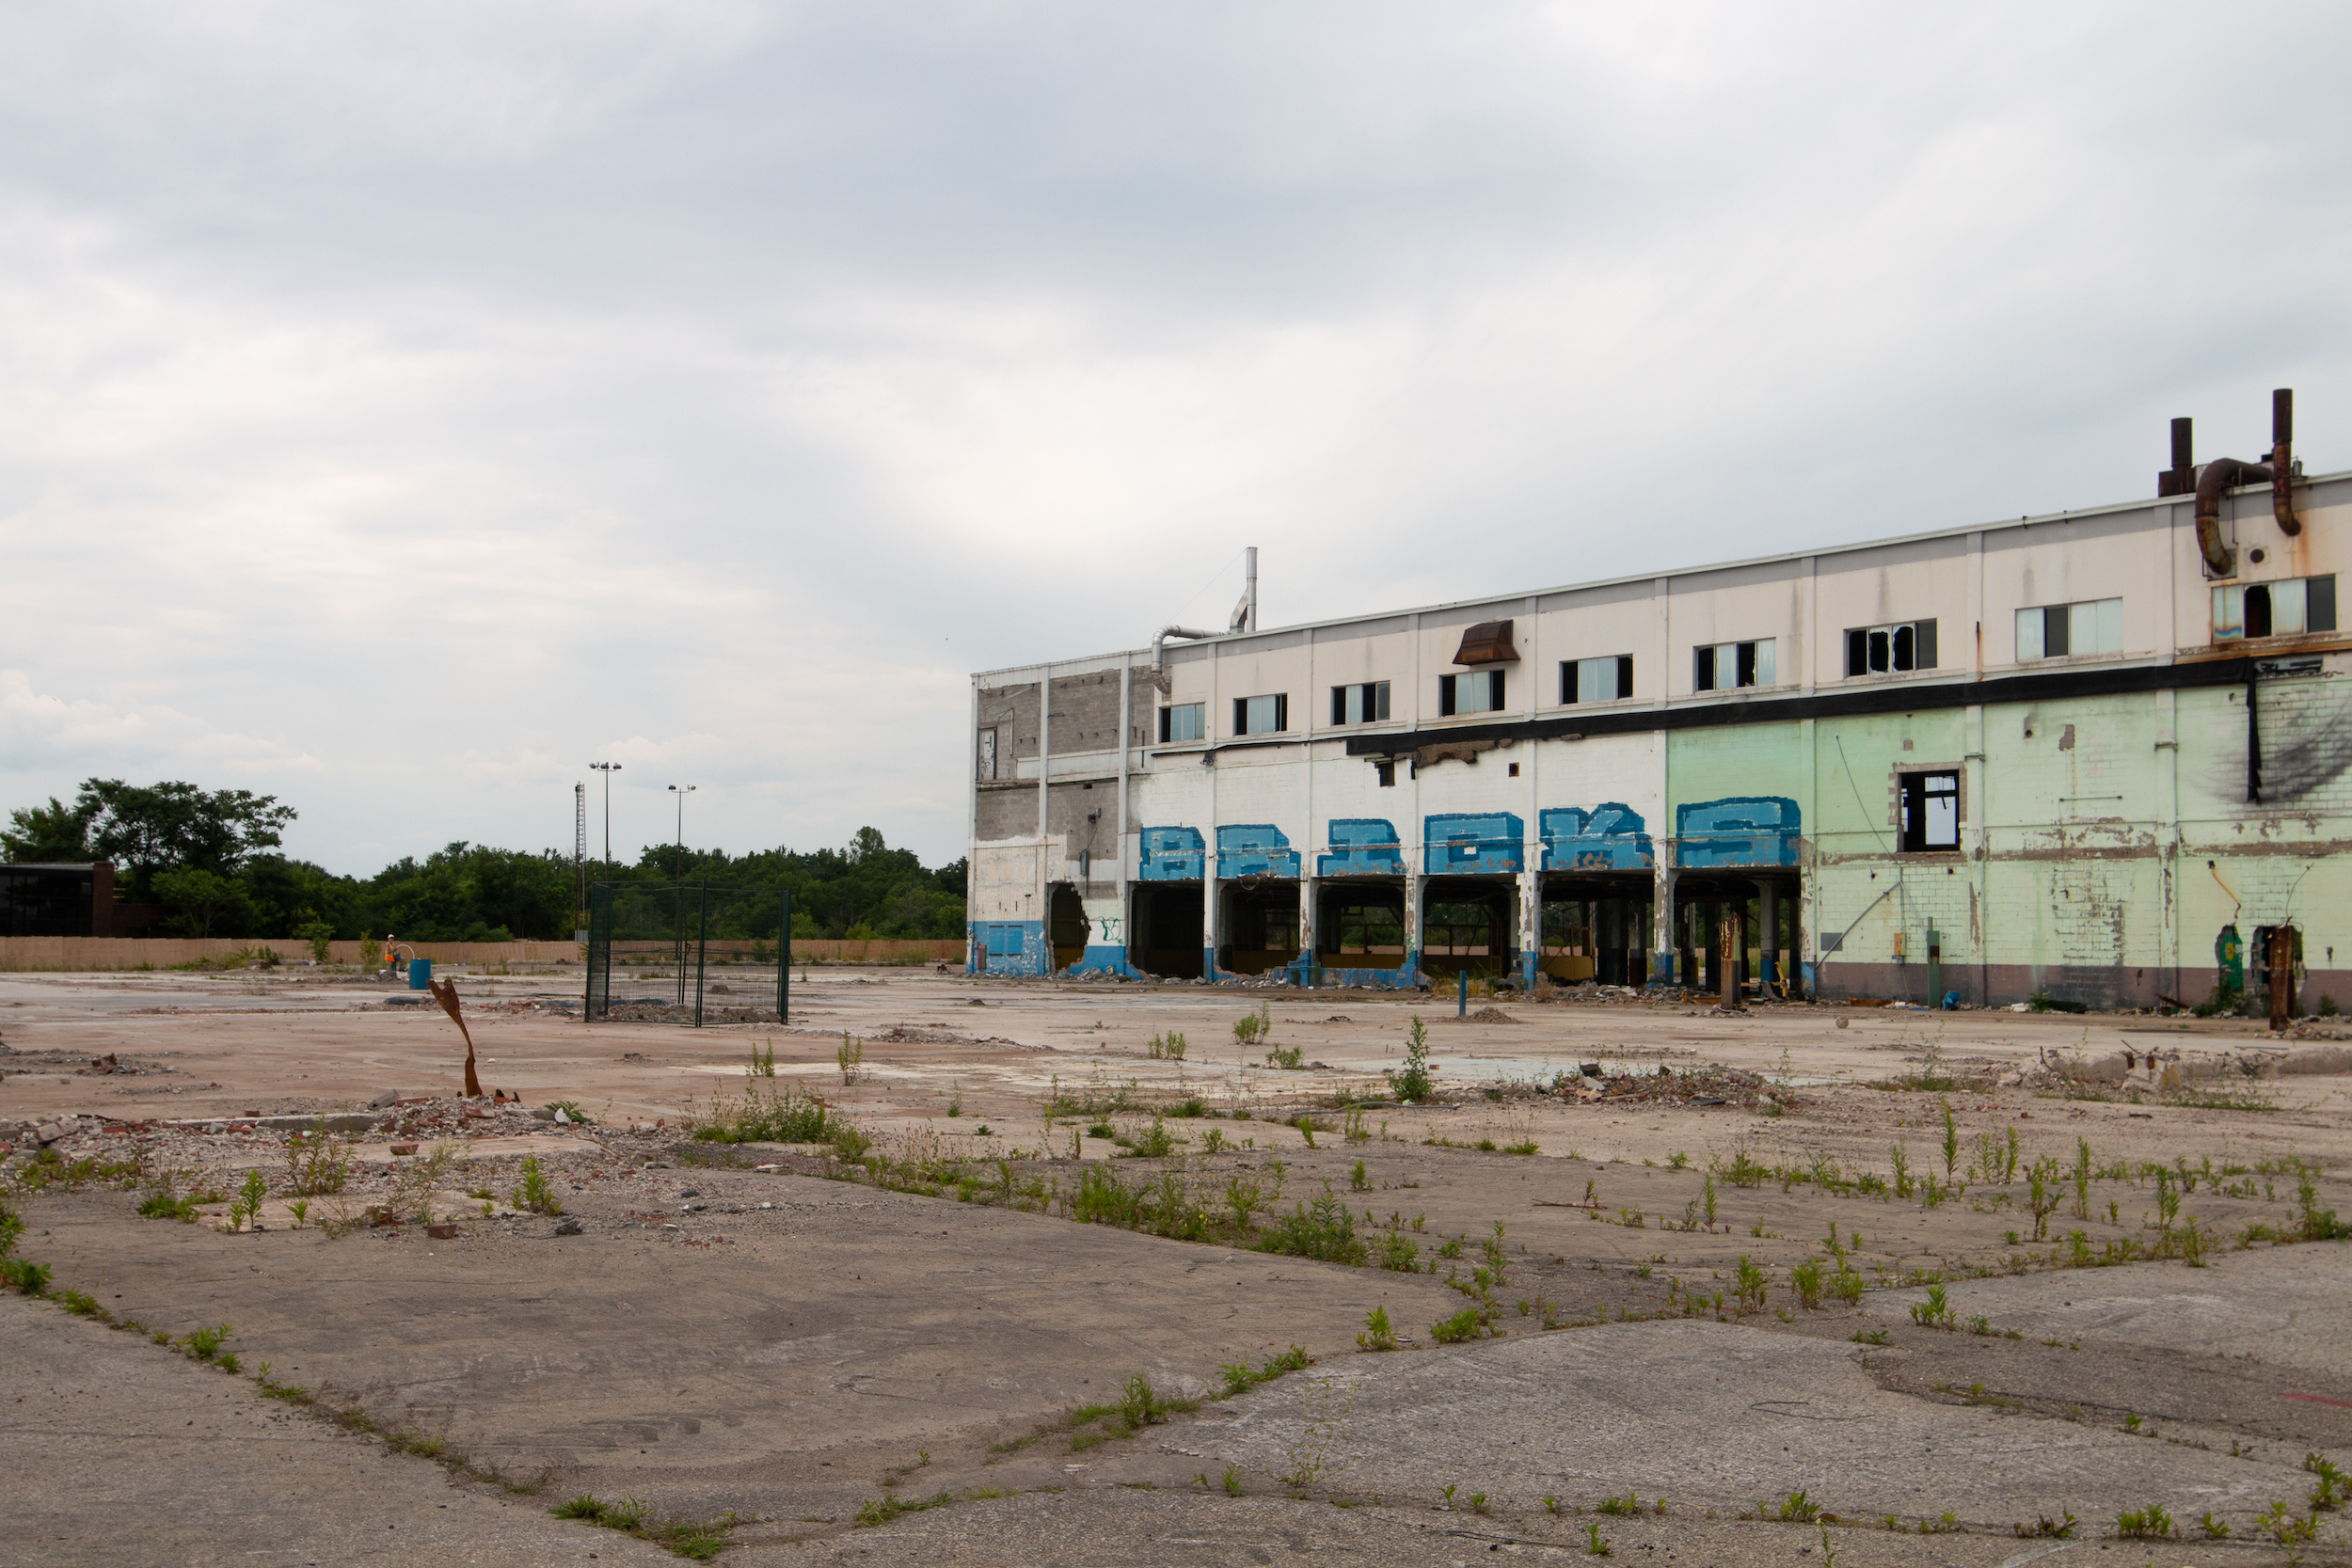 A derelict former General Motors site in St. Catharines, Ont. Photo: Ramona Leitao / The Narwhal